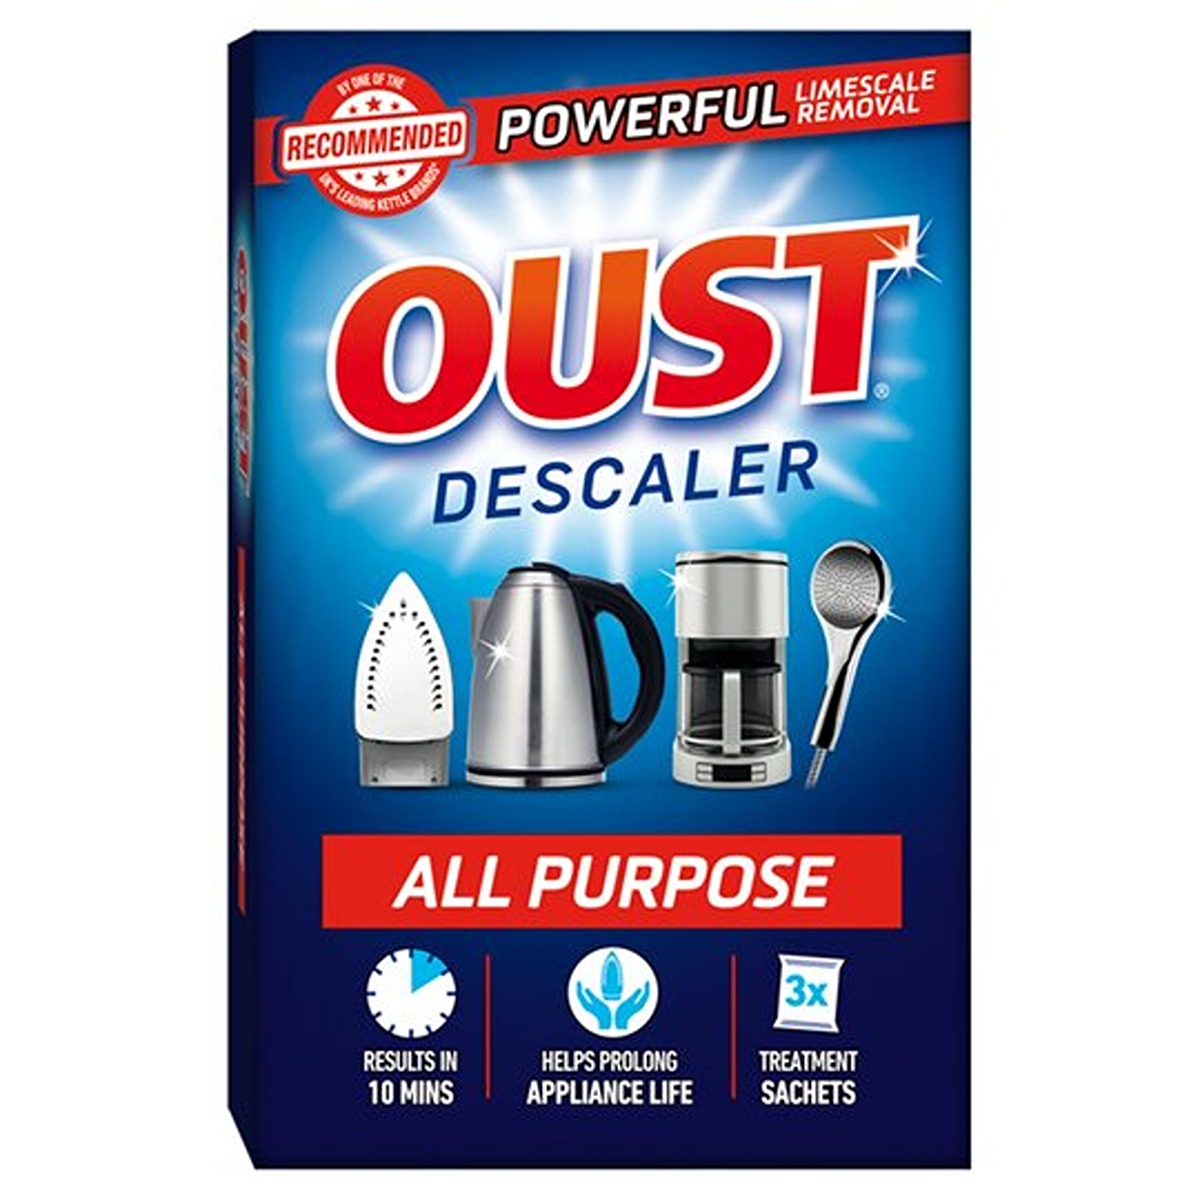 Oust - Descaler All Purpose - 3x25ml - Continental Food Store